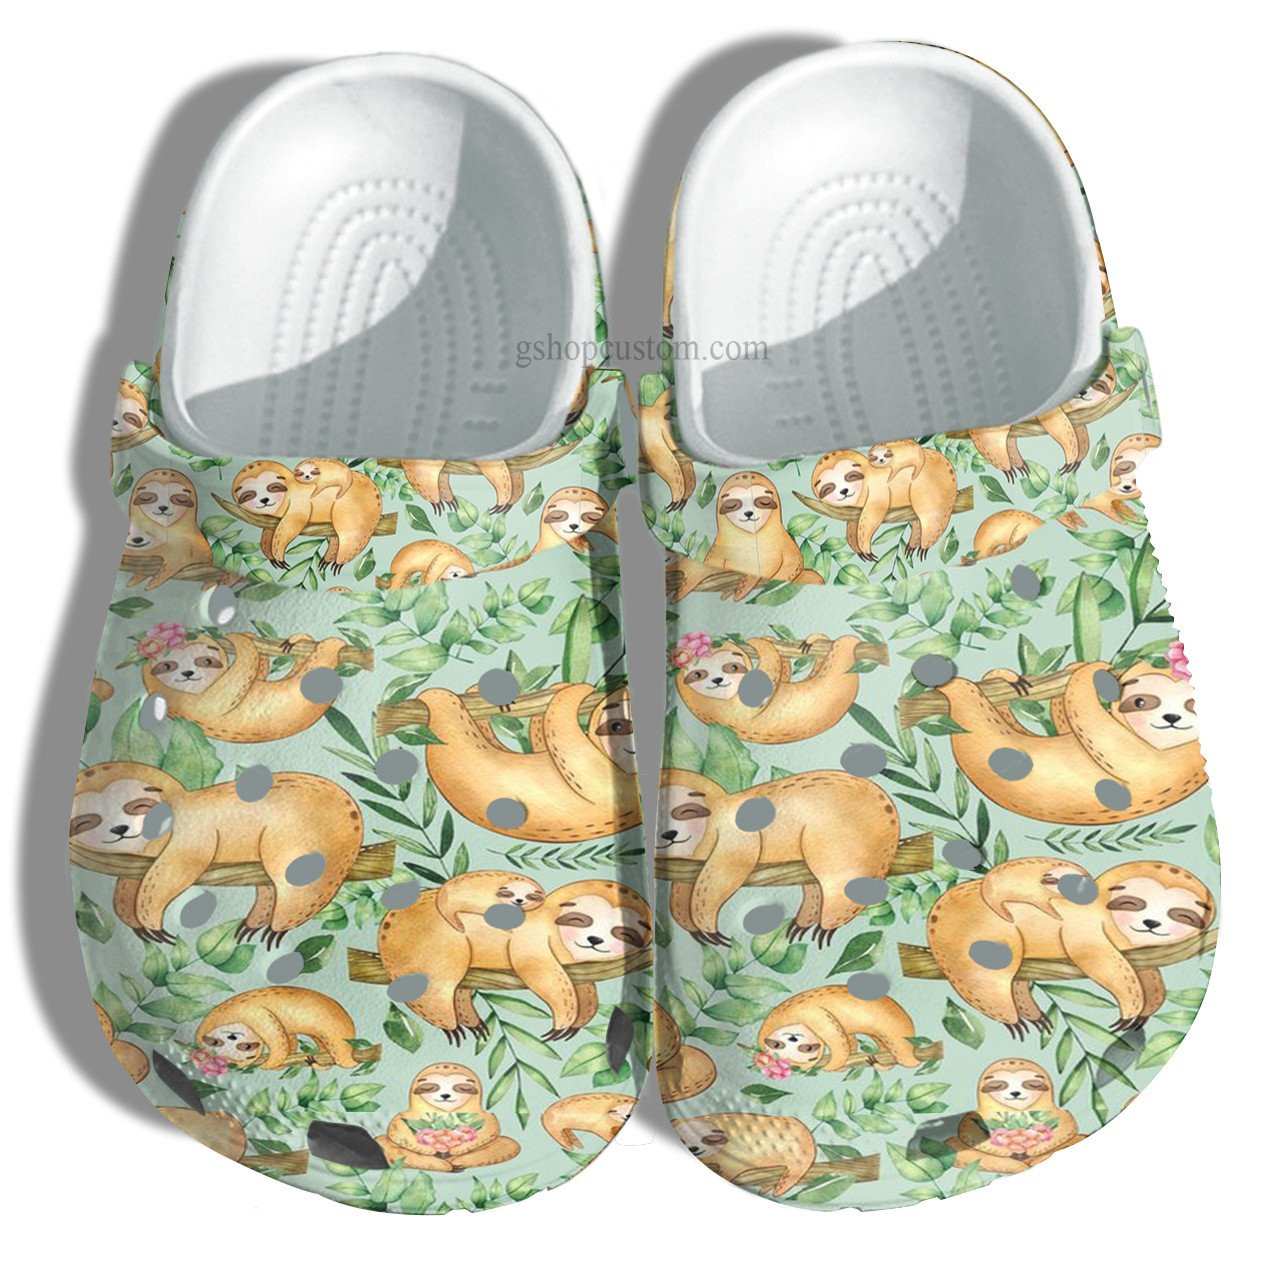 Chibi Sloth Sleeping Crocs Shoes - Sloth Lazzy Funny Day Shoes Croc Clogs Gift